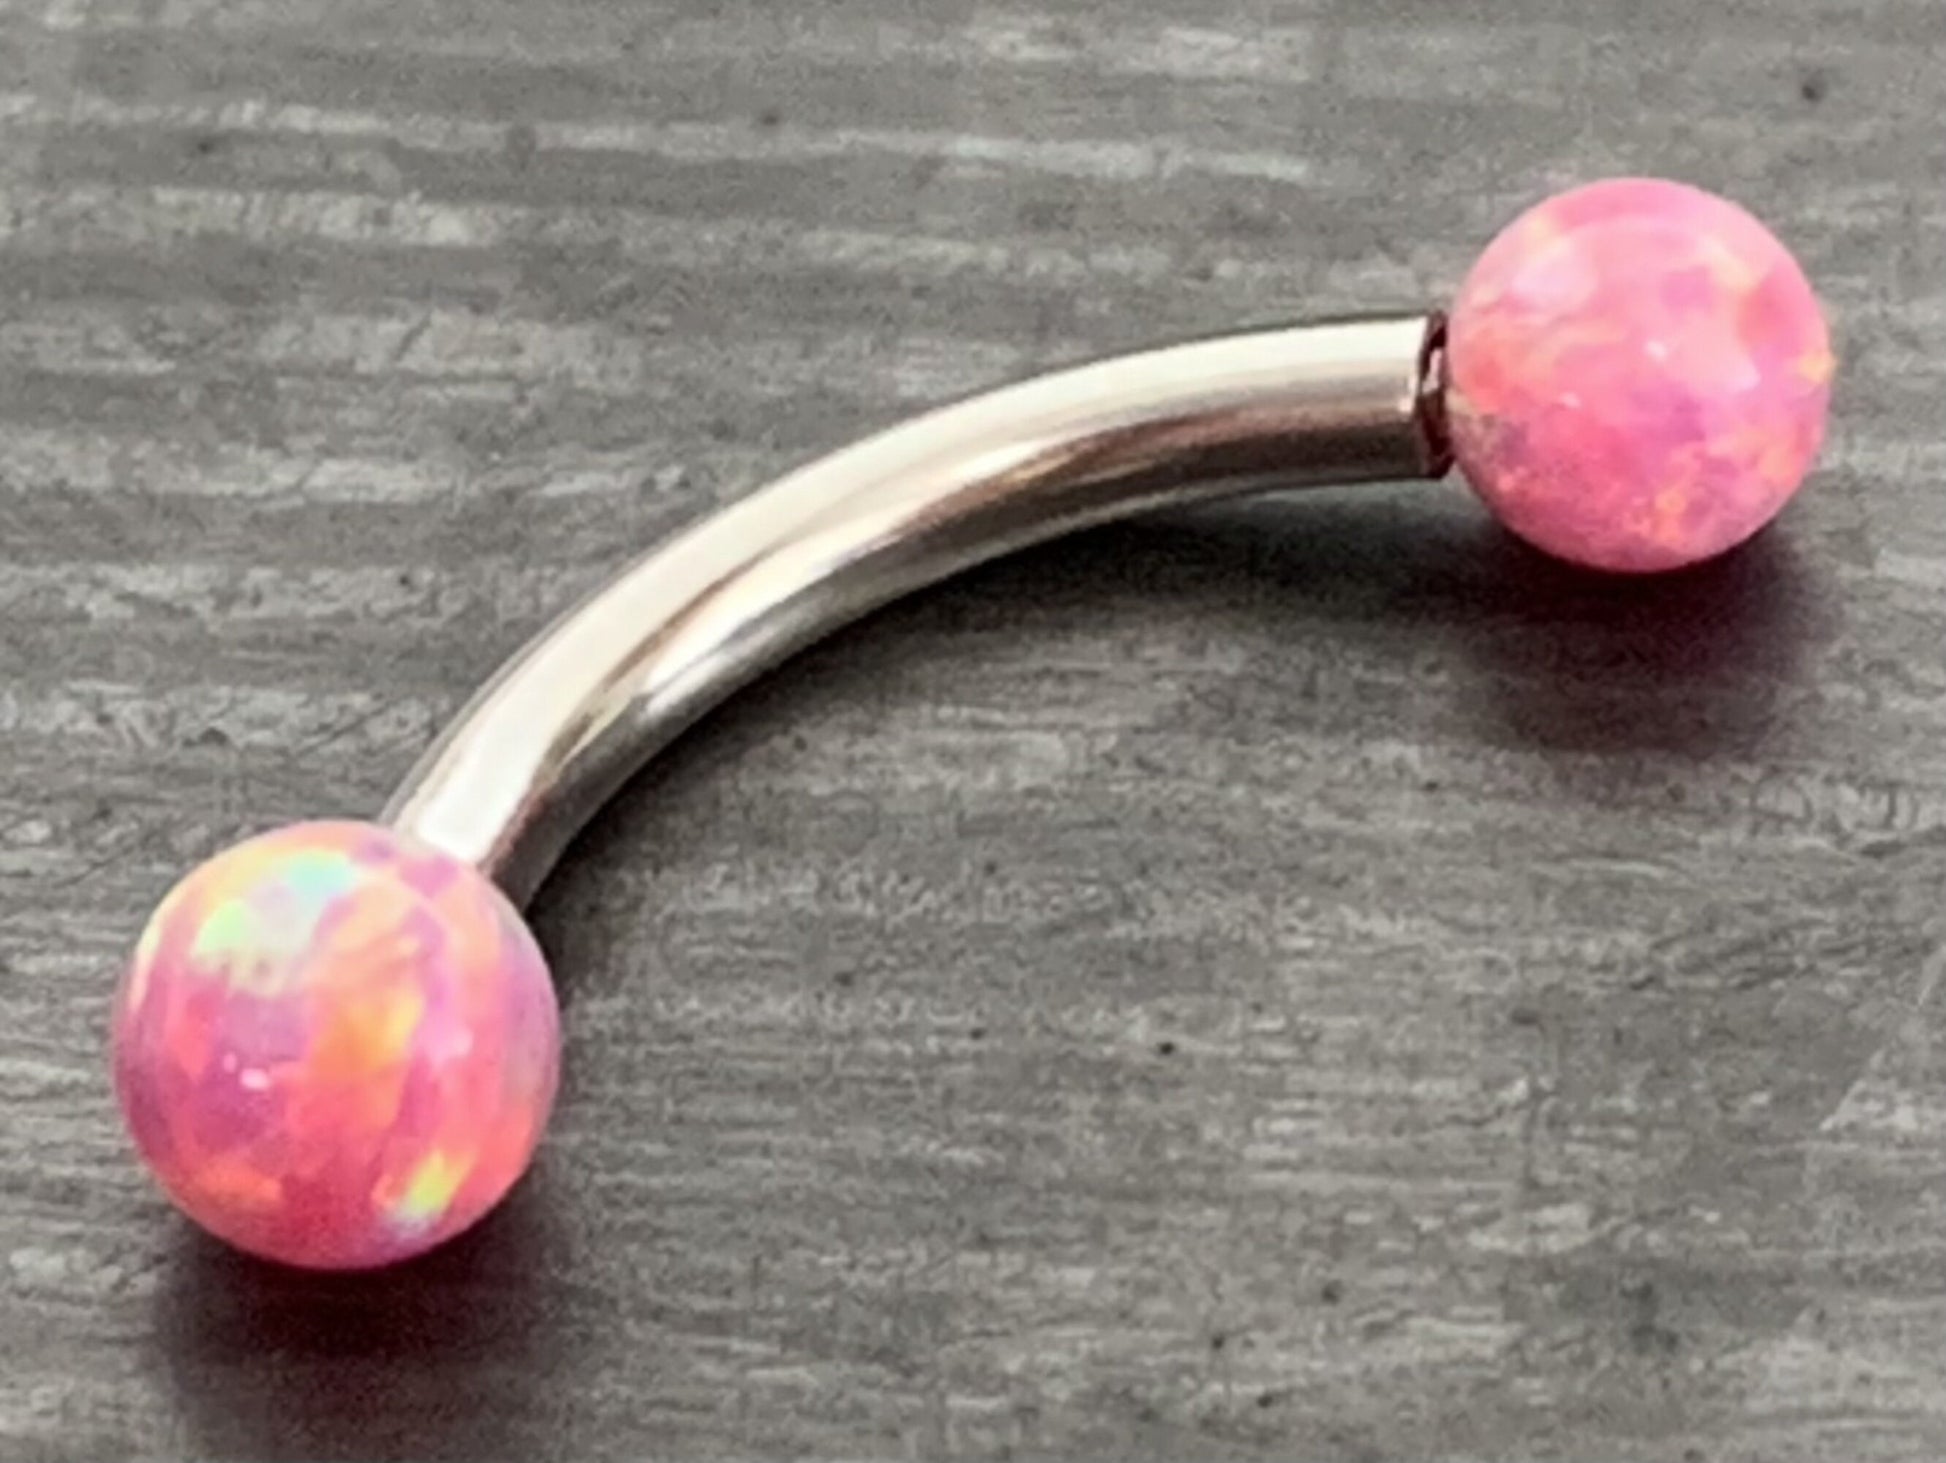 1 Piece Opal Balls Curved Surgical Steel Eyebrow Ring - 16g, 5/16" (8mm) - Blue, Pink or White - YOU Choose Color!!!